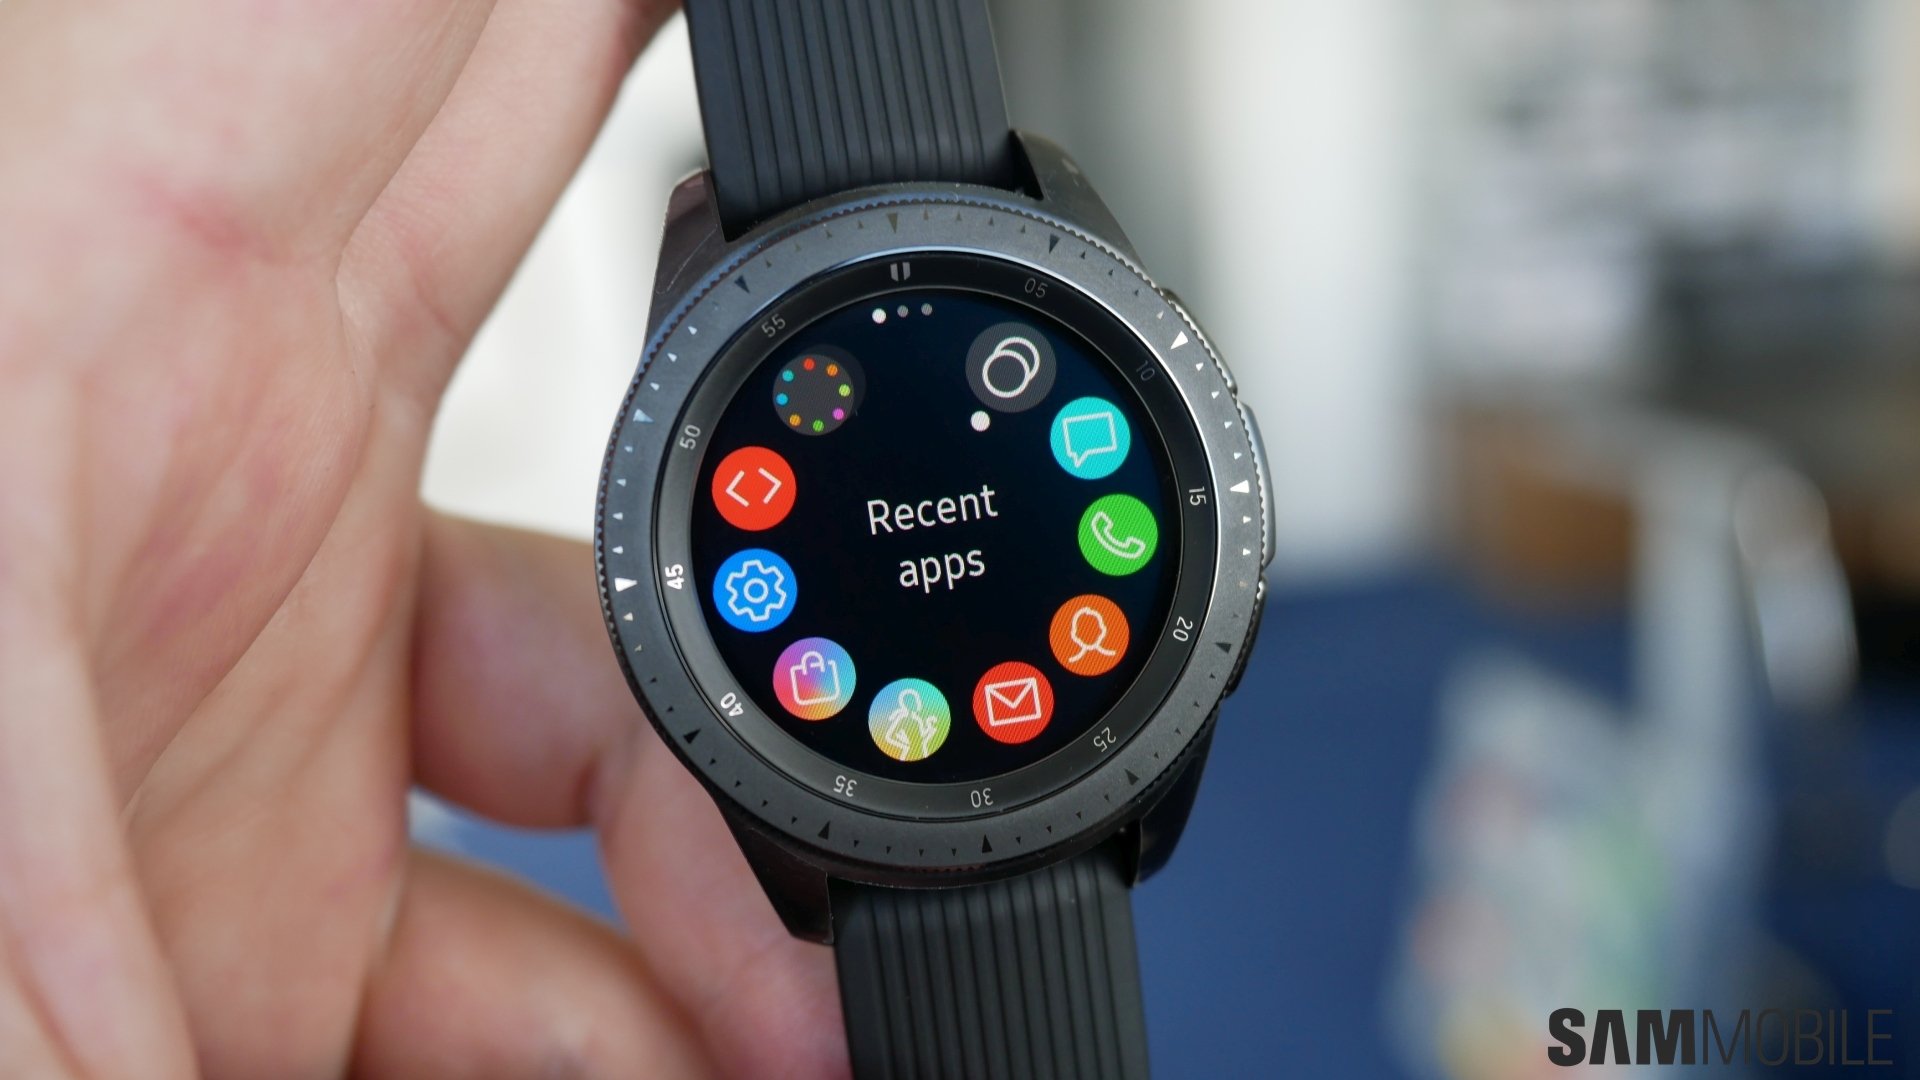 when is the next galaxy watch coming out